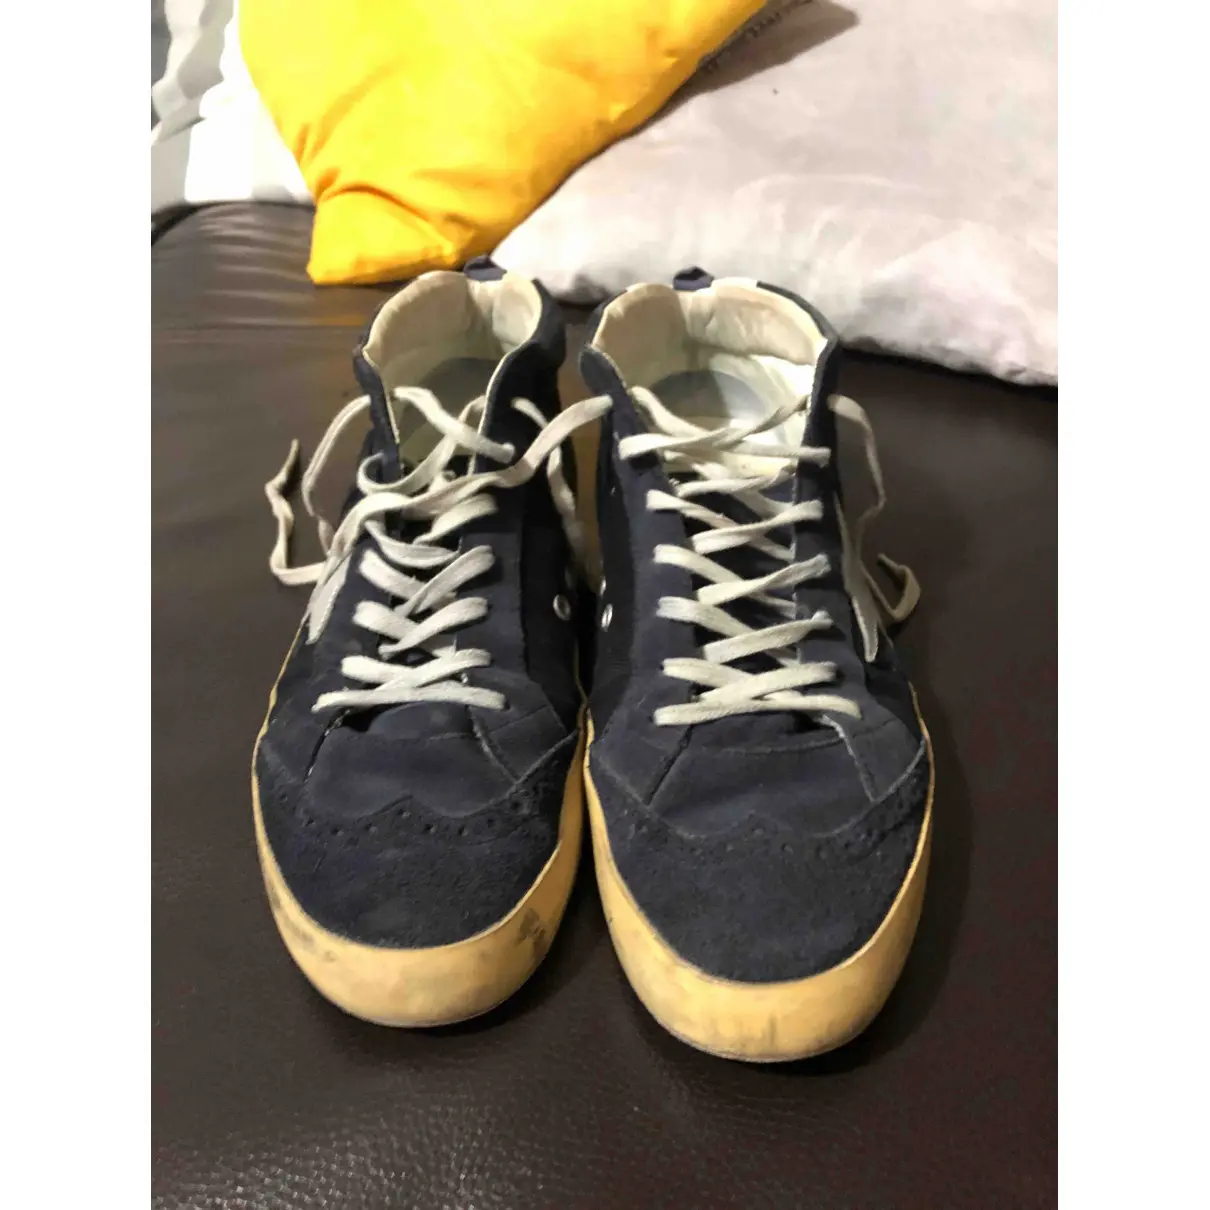 Buy Golden Goose Mid Star cloth high trainers online